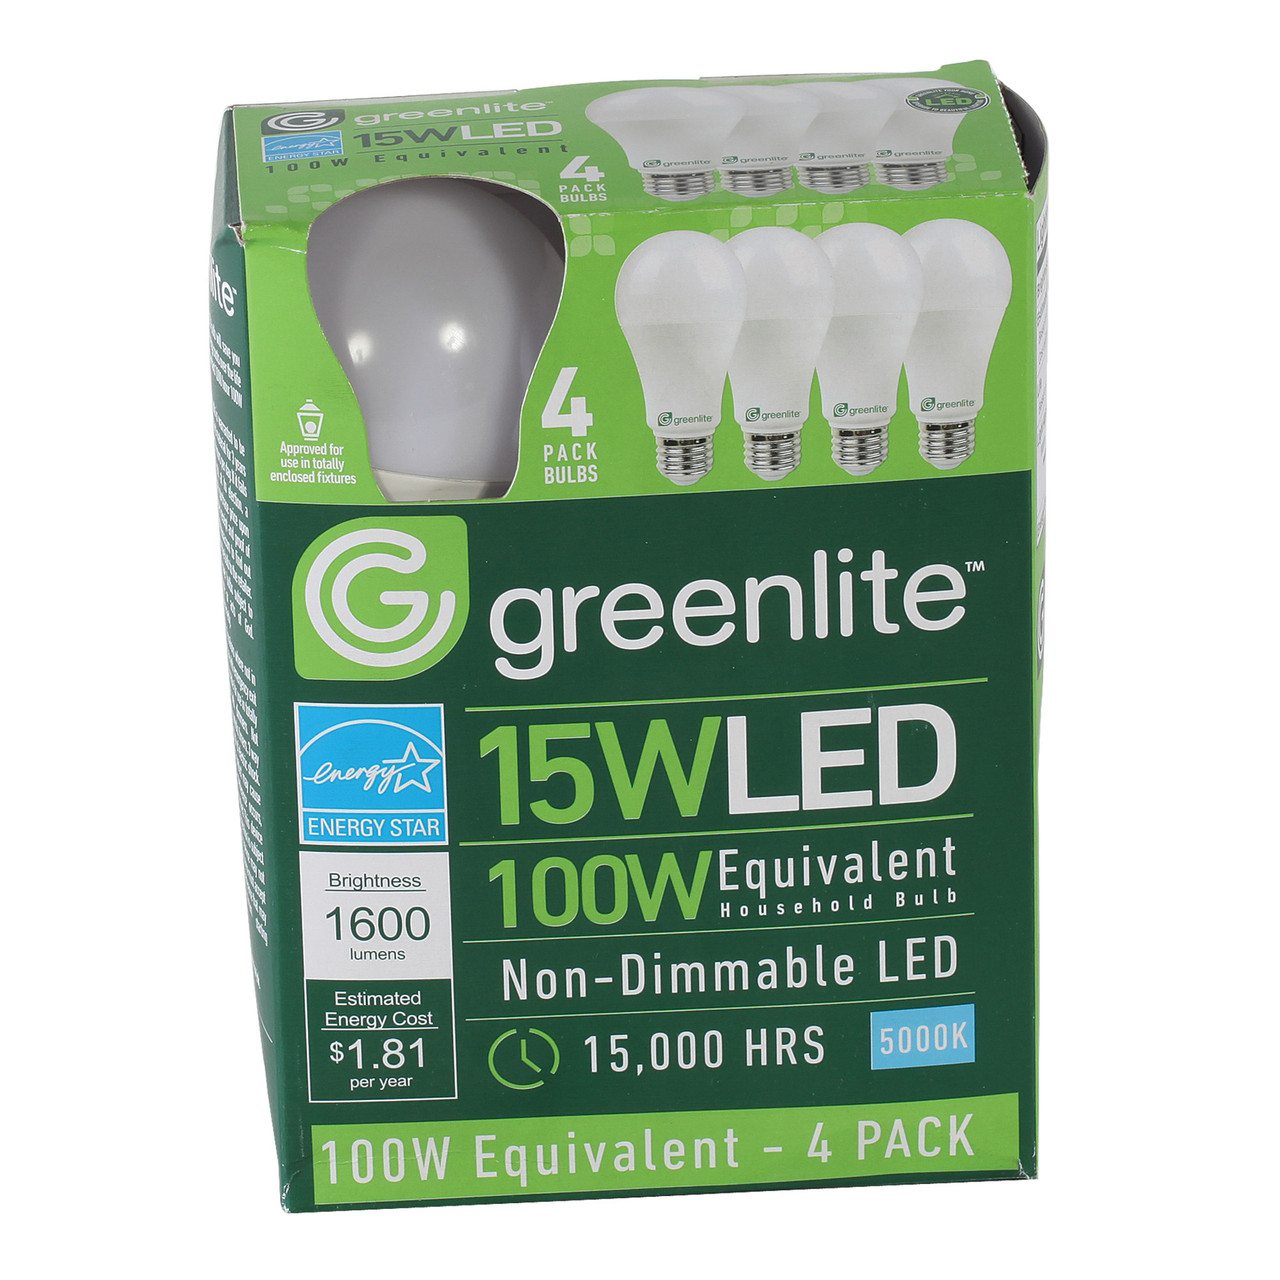 4 Pack 15W Greenlite LED 100 Watt Equivalent A Type Light Bulbs Non-Dimmable 